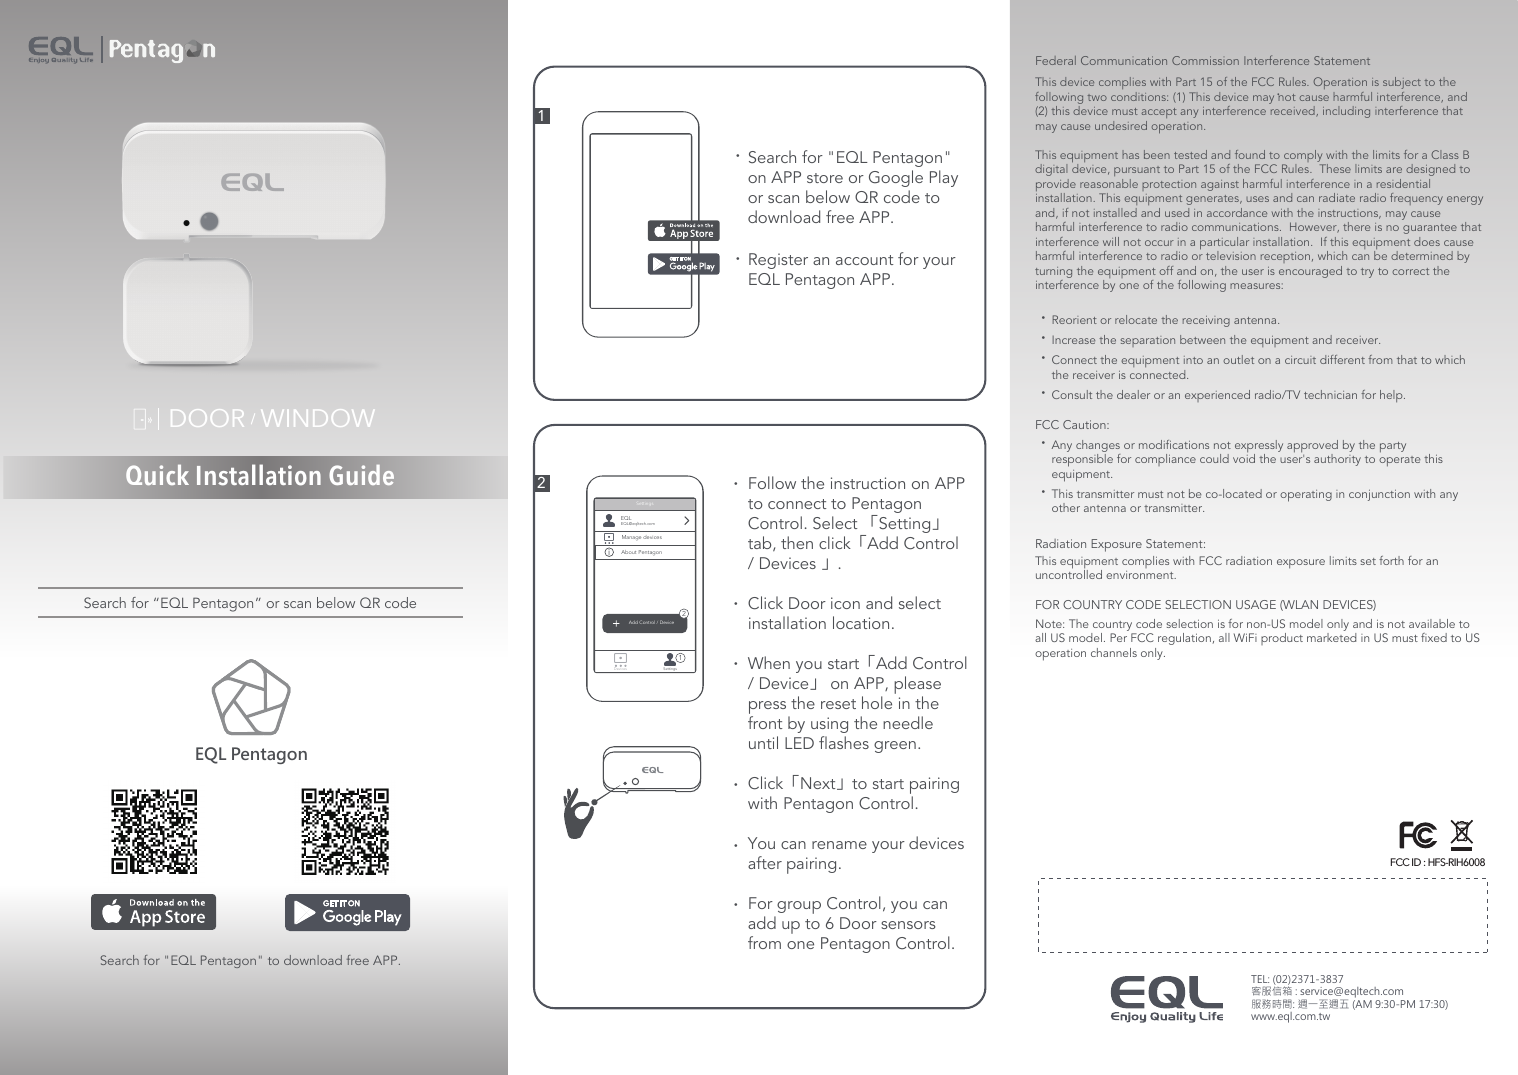 Quick Installation GuideDOOR   WINDOWSearch for &quot;EQL Pentagon&quot; to download free APP.Search for “EQL Pentagon” or scan below QR codeEQL Pentagon21••Register an account for your EQL Pentagon APP.Search for &quot;EQL Pentagon&quot; on APP store or Google Play or scan below QR code to download free APP. •• ••••Add Control / Device21DevicesSettingsFollow the instruction on APP to connect to Pentagon Control. Select 「Setting」tab, then click「Add Control / Devices 」.Click Door icon and select installation location.When you start「Add Control / Device」 on APP, please press the reset hole in the front by using the needle until LED flashes green.  Click「Next」to start pairing with Pentagon Control.You can rename your devices after pairing.For group Control, you can add up to 6 Door sensors from one Pentagon Control. SettingsEQLEQL@eqltech.comManage devicesAbout Pentagon!Federal Communication Commission Interference StatementThis device complies with Part 15 of the FCC Rules. Operation is subject to the following two conditions: (1) This device may not cause harmful interference, and (2) this device must accept any interference received, including interference that may cause undesired operation. This equipment has been tested and found to comply with the limits for a Class B digital device, pursuant to Part 15 of the FCC Rules.  These limits are designed to provide reasonable protection against harmful interference in a residential installation. This equipment generates, uses and can radiate radio frequency energy and, if not installed and used in accordance with the instructions, may cause harmful interference to radio communications.  However, there is no guarantee that interference will not occur in a particular installation.  If this equipment does cause harmful interference to radio or television reception, which can be determined by turning the equipment off and on, the user is encouraged to try to correct the interference by one of the following measures: •Reorient or relocate the receiving antenna.•Increase the separation between the equipment and receiver.•Connect the equipment into an outlet on a circuit different from that to which      the receiver is connected.•Consult the dealer or an experienced radio/TV technician for help. FCC Caution:•Any changes or modifications not expressly approved by the party      responsible for compliance could void the user&apos;s authority to operate this      equipment.•This transmitter must not be co-located or operating in conjunction with any      other antenna or transmitter.Radiation Exposure Statement:This equipment complies with FCC radiation exposure limits set forth for an uncontrolled environment. FOR COUNTRY CODE SELECTION USAGE (WLAN DEVICES)Note: The country code selection is for non-US model only and is not available to all US model. Per FCC regulation, all WiFi product marketed in US must fixed to US operation channels only..TEL: (02)2371-3837 客服信箱 : service@eqltech.com 服務時間: 週一至週五 (AM 9:30-PM 17:30)www.eql.com.tw FCC ID : HFS-RIH6008